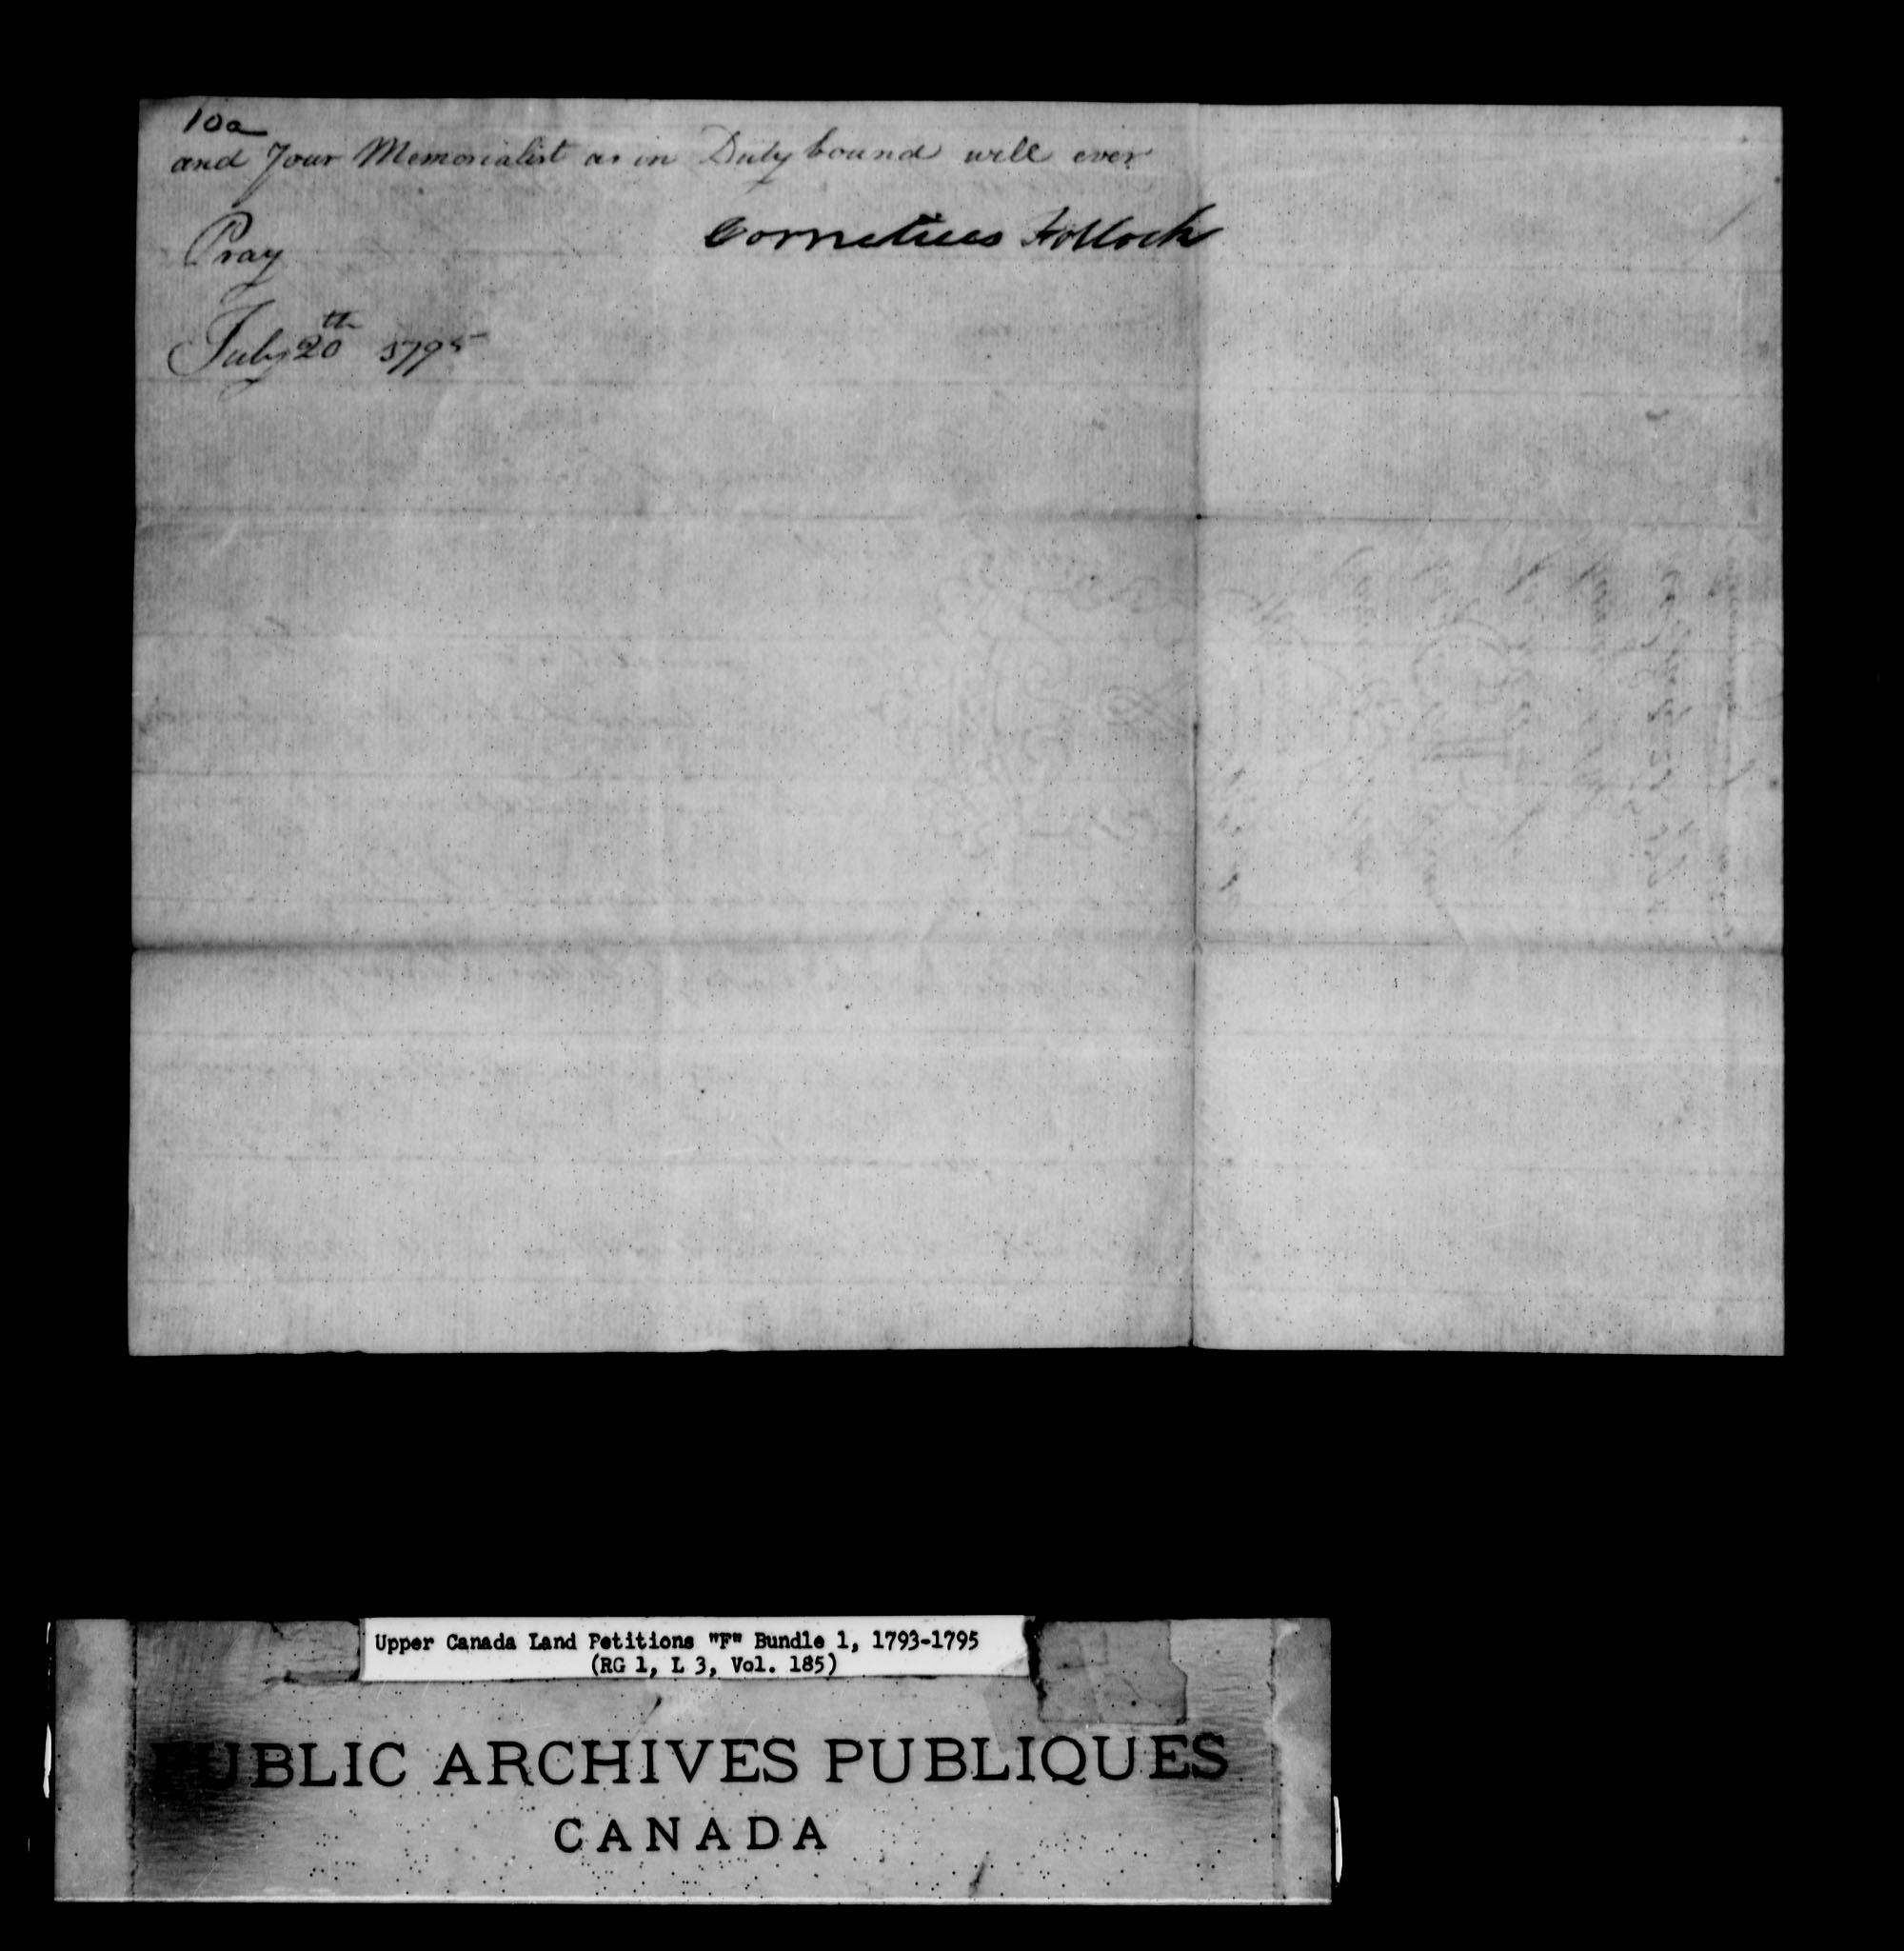 Title: Upper Canada Land Petitions (1763-1865) - Mikan Number: 205131 - Microform: c-1893